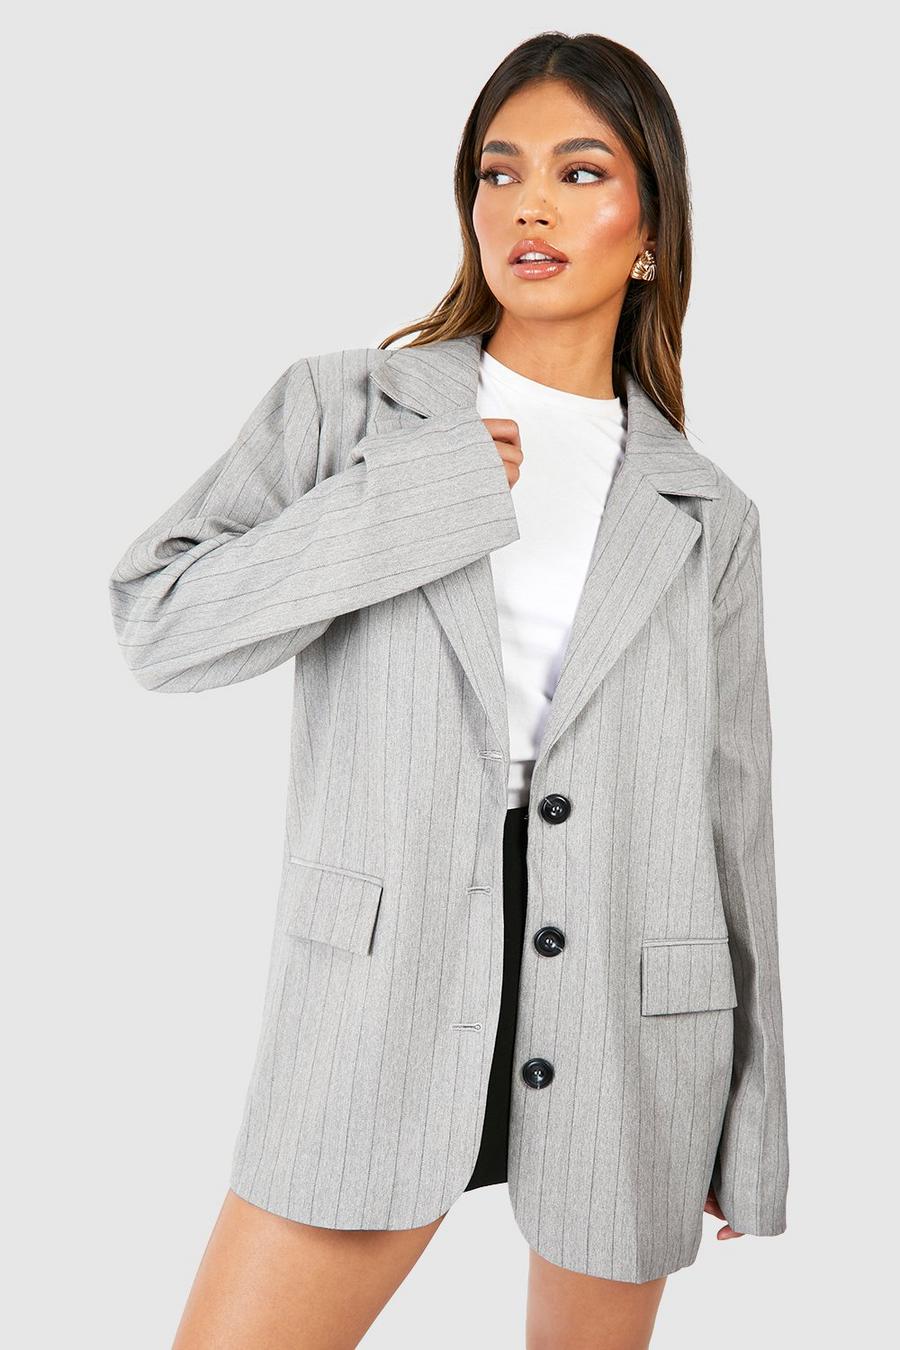 Grey Marl Pinstripe Relaxed Fit Tailored Blazer